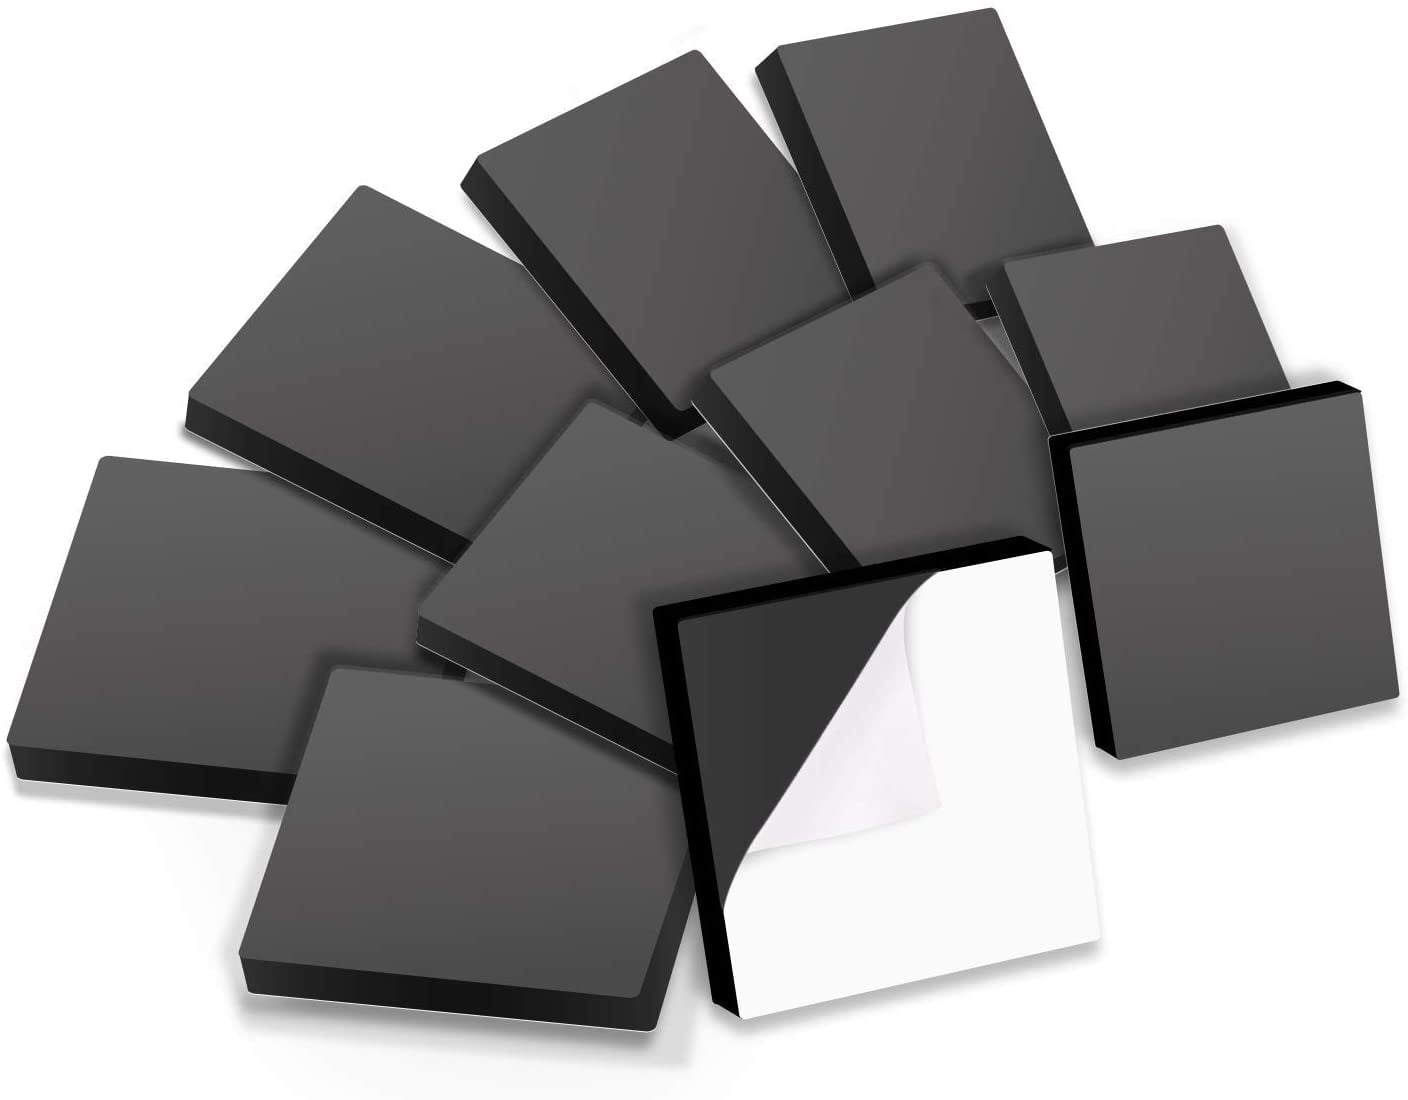 1" x 1" Self Adhesive Magnets - Pack of 50 - Squares 60mil -